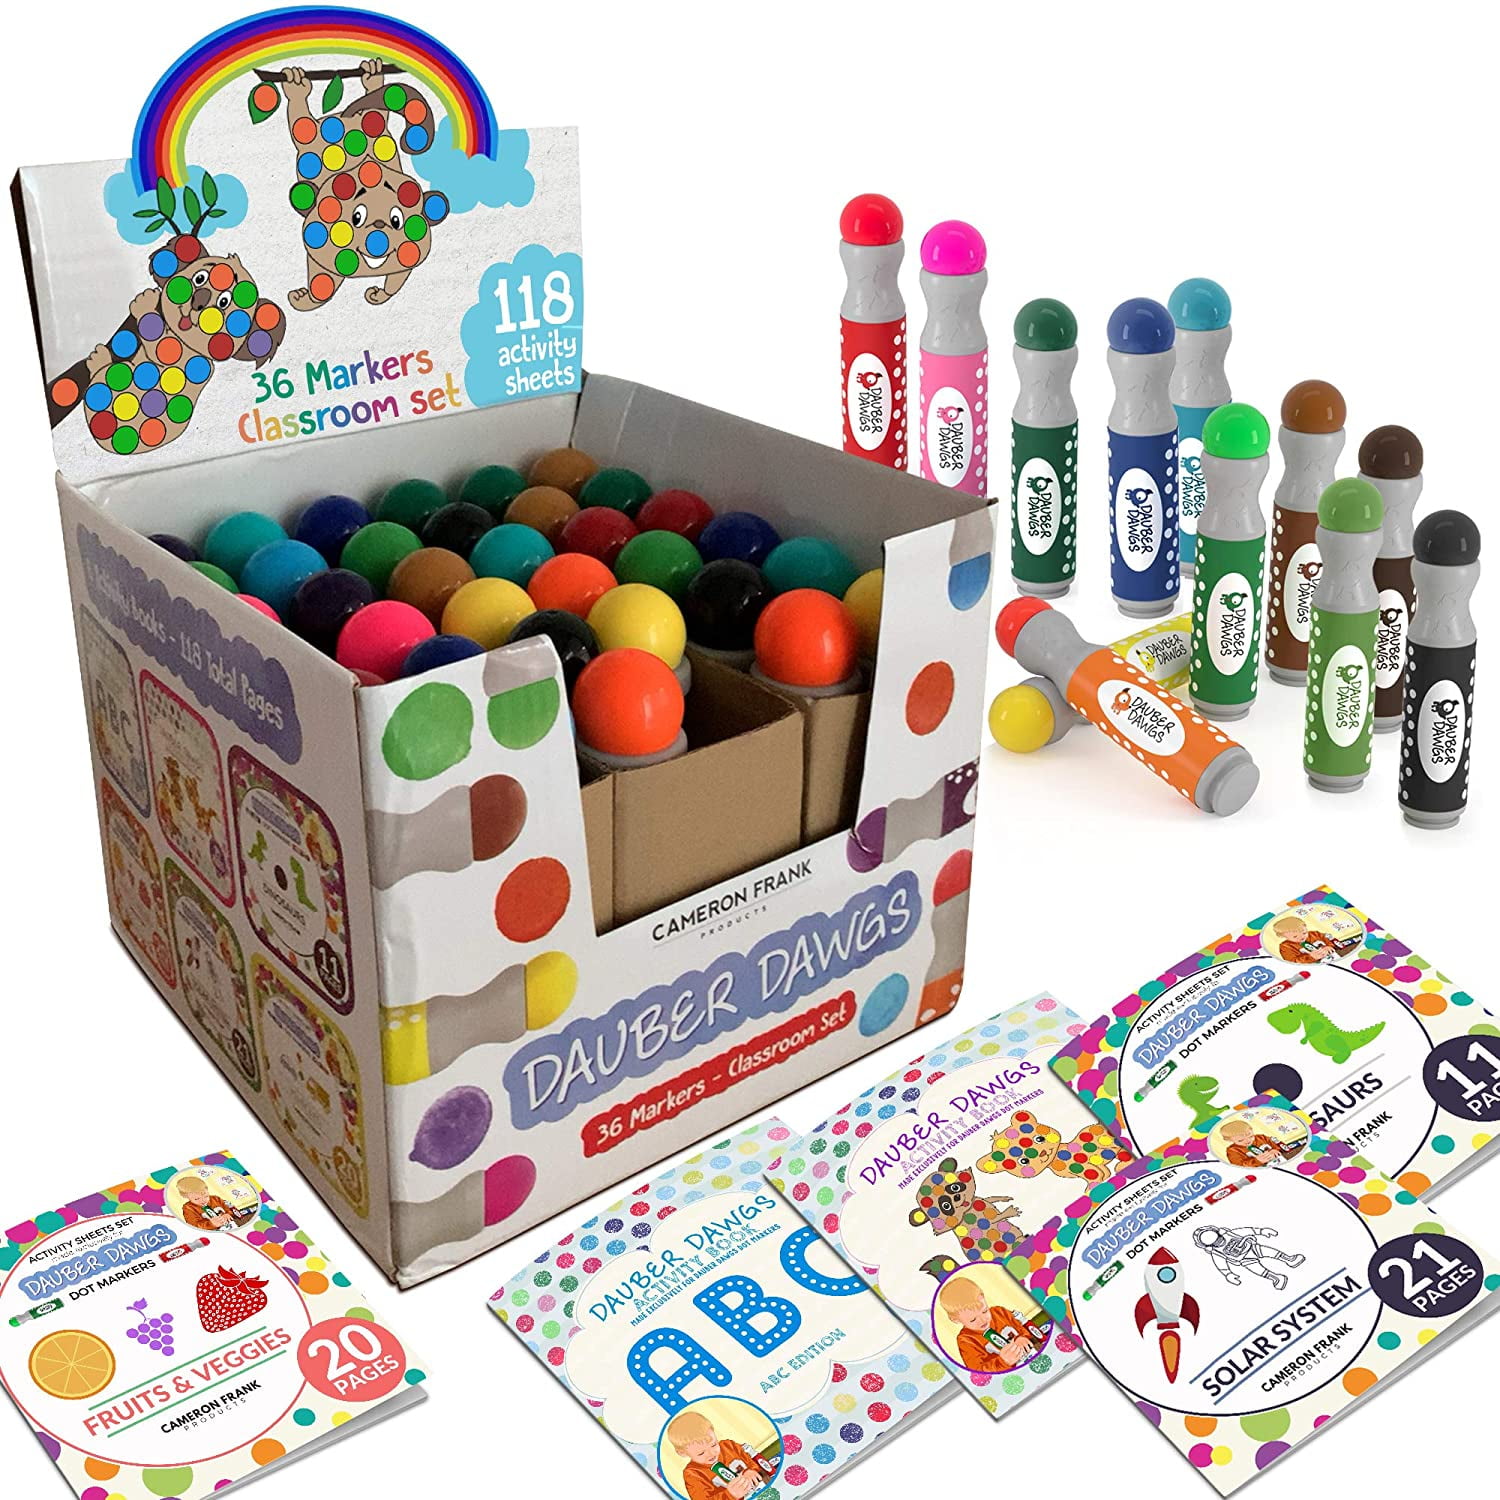 Cameron Frank Products Dot Markers for Toddlers 1-3 - Set of 8